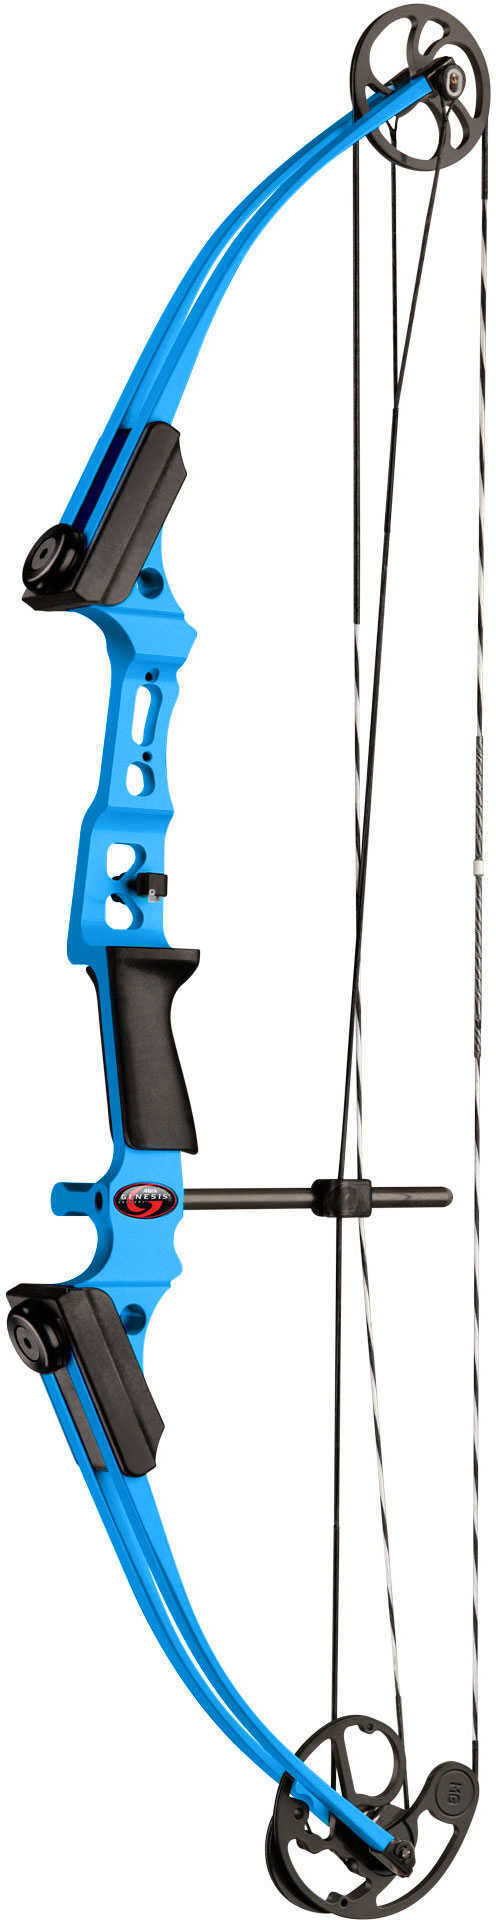 Genesis Mini Bow Left Handed Blue Only 11416